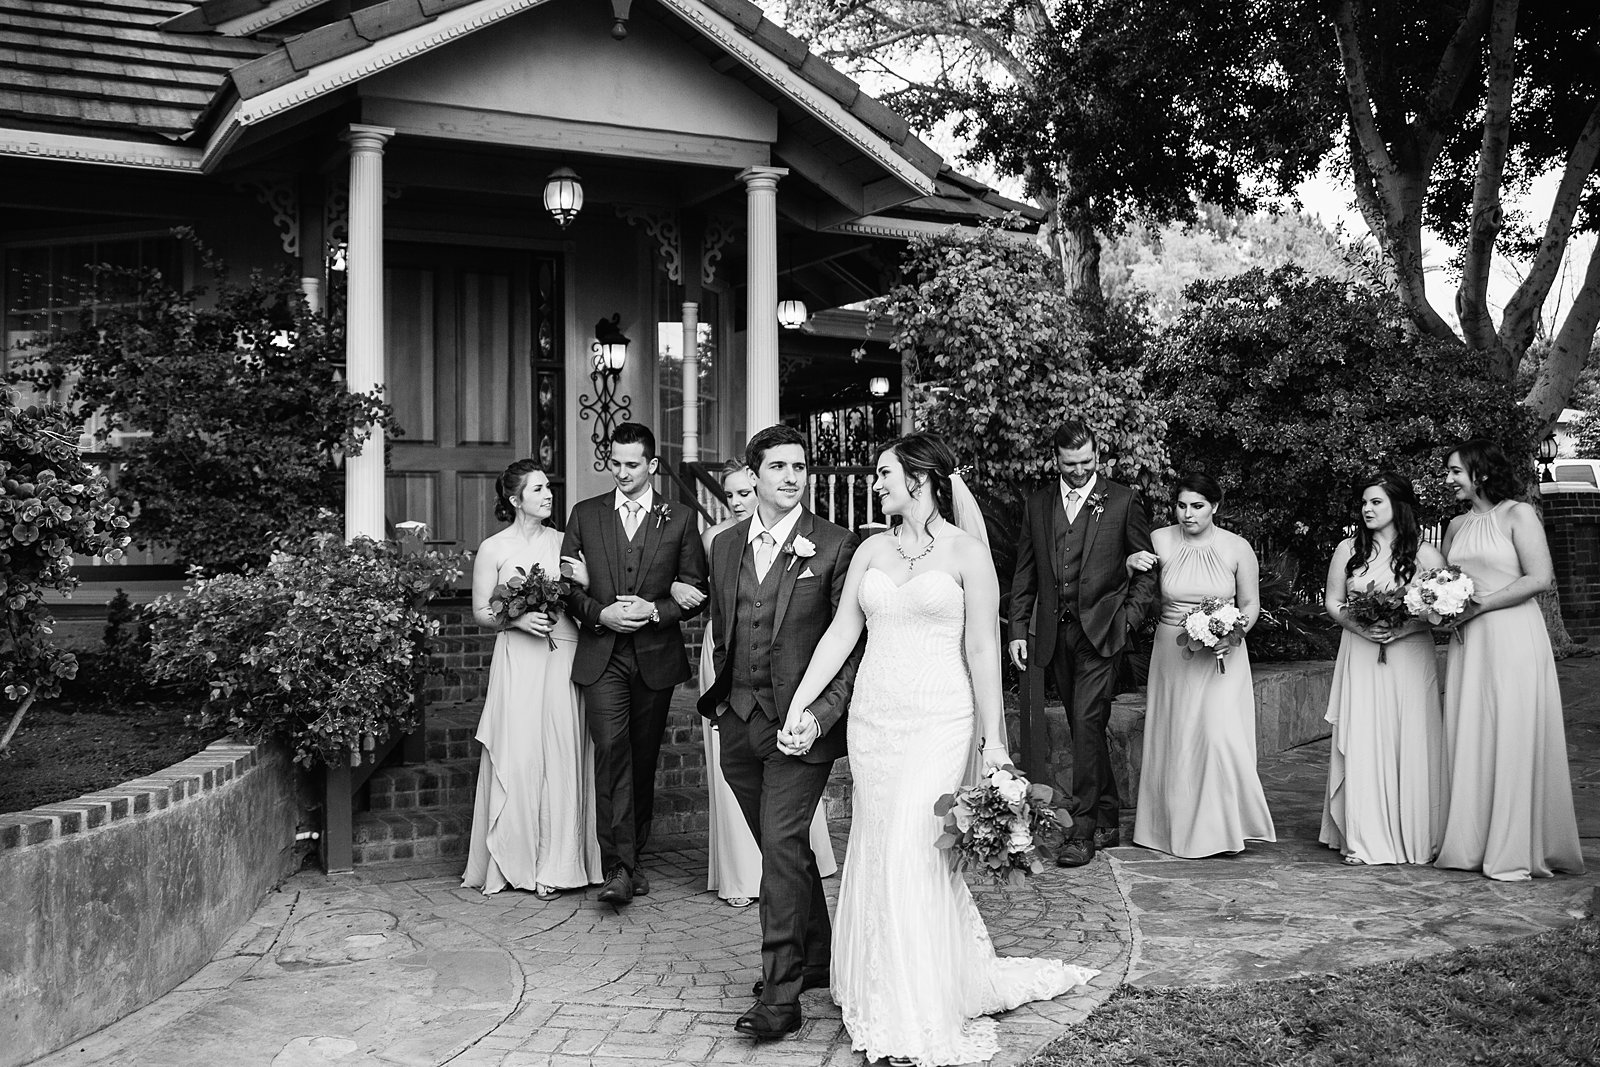 Mixed gender bridal party walking together at The Wright House wedding by Mesa wedding photographer PMA Photography.